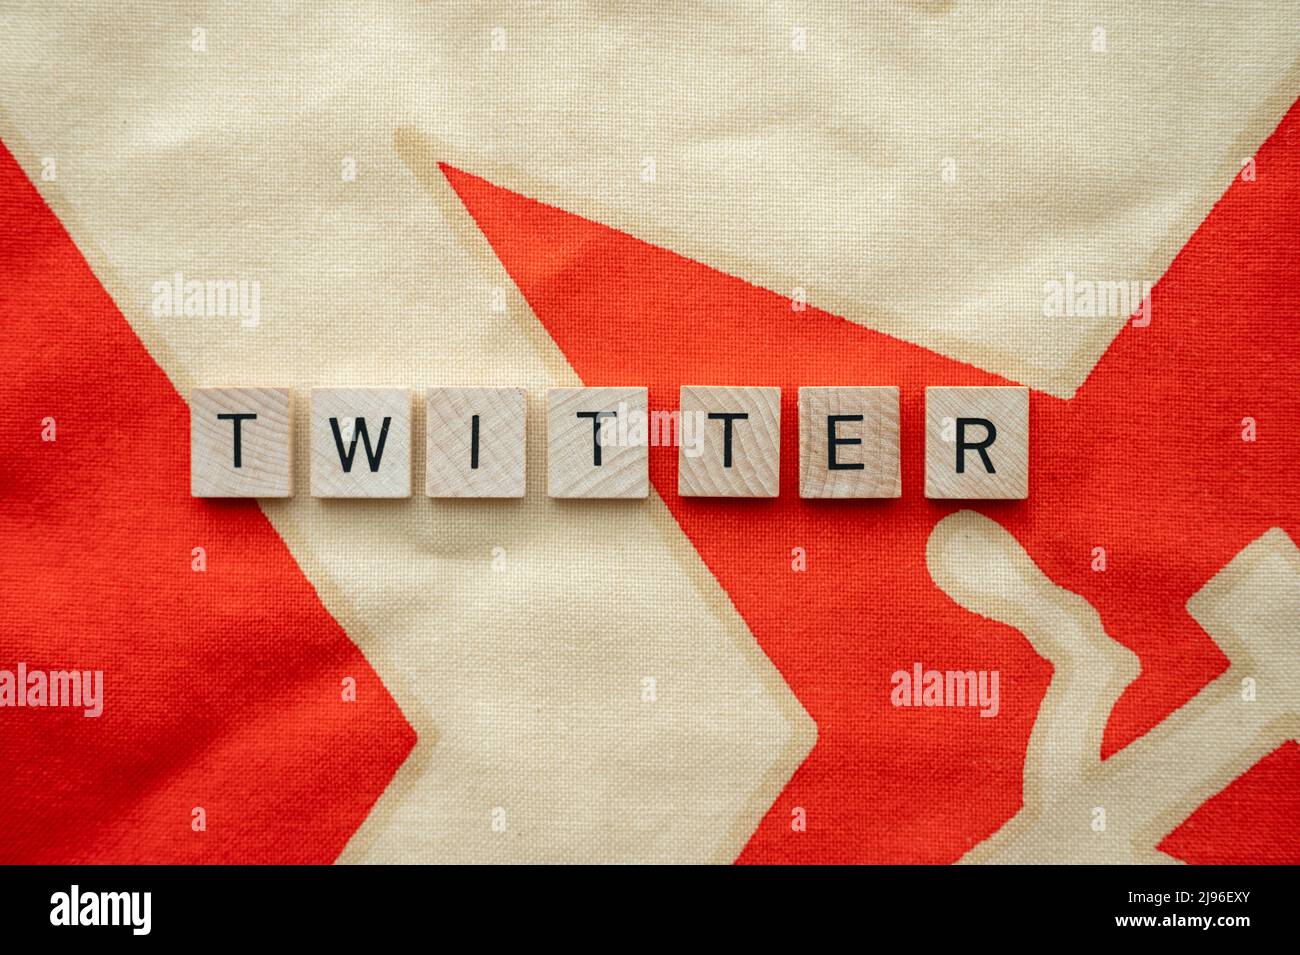 Twitter left wing bias concept on red flag. Stock Photo